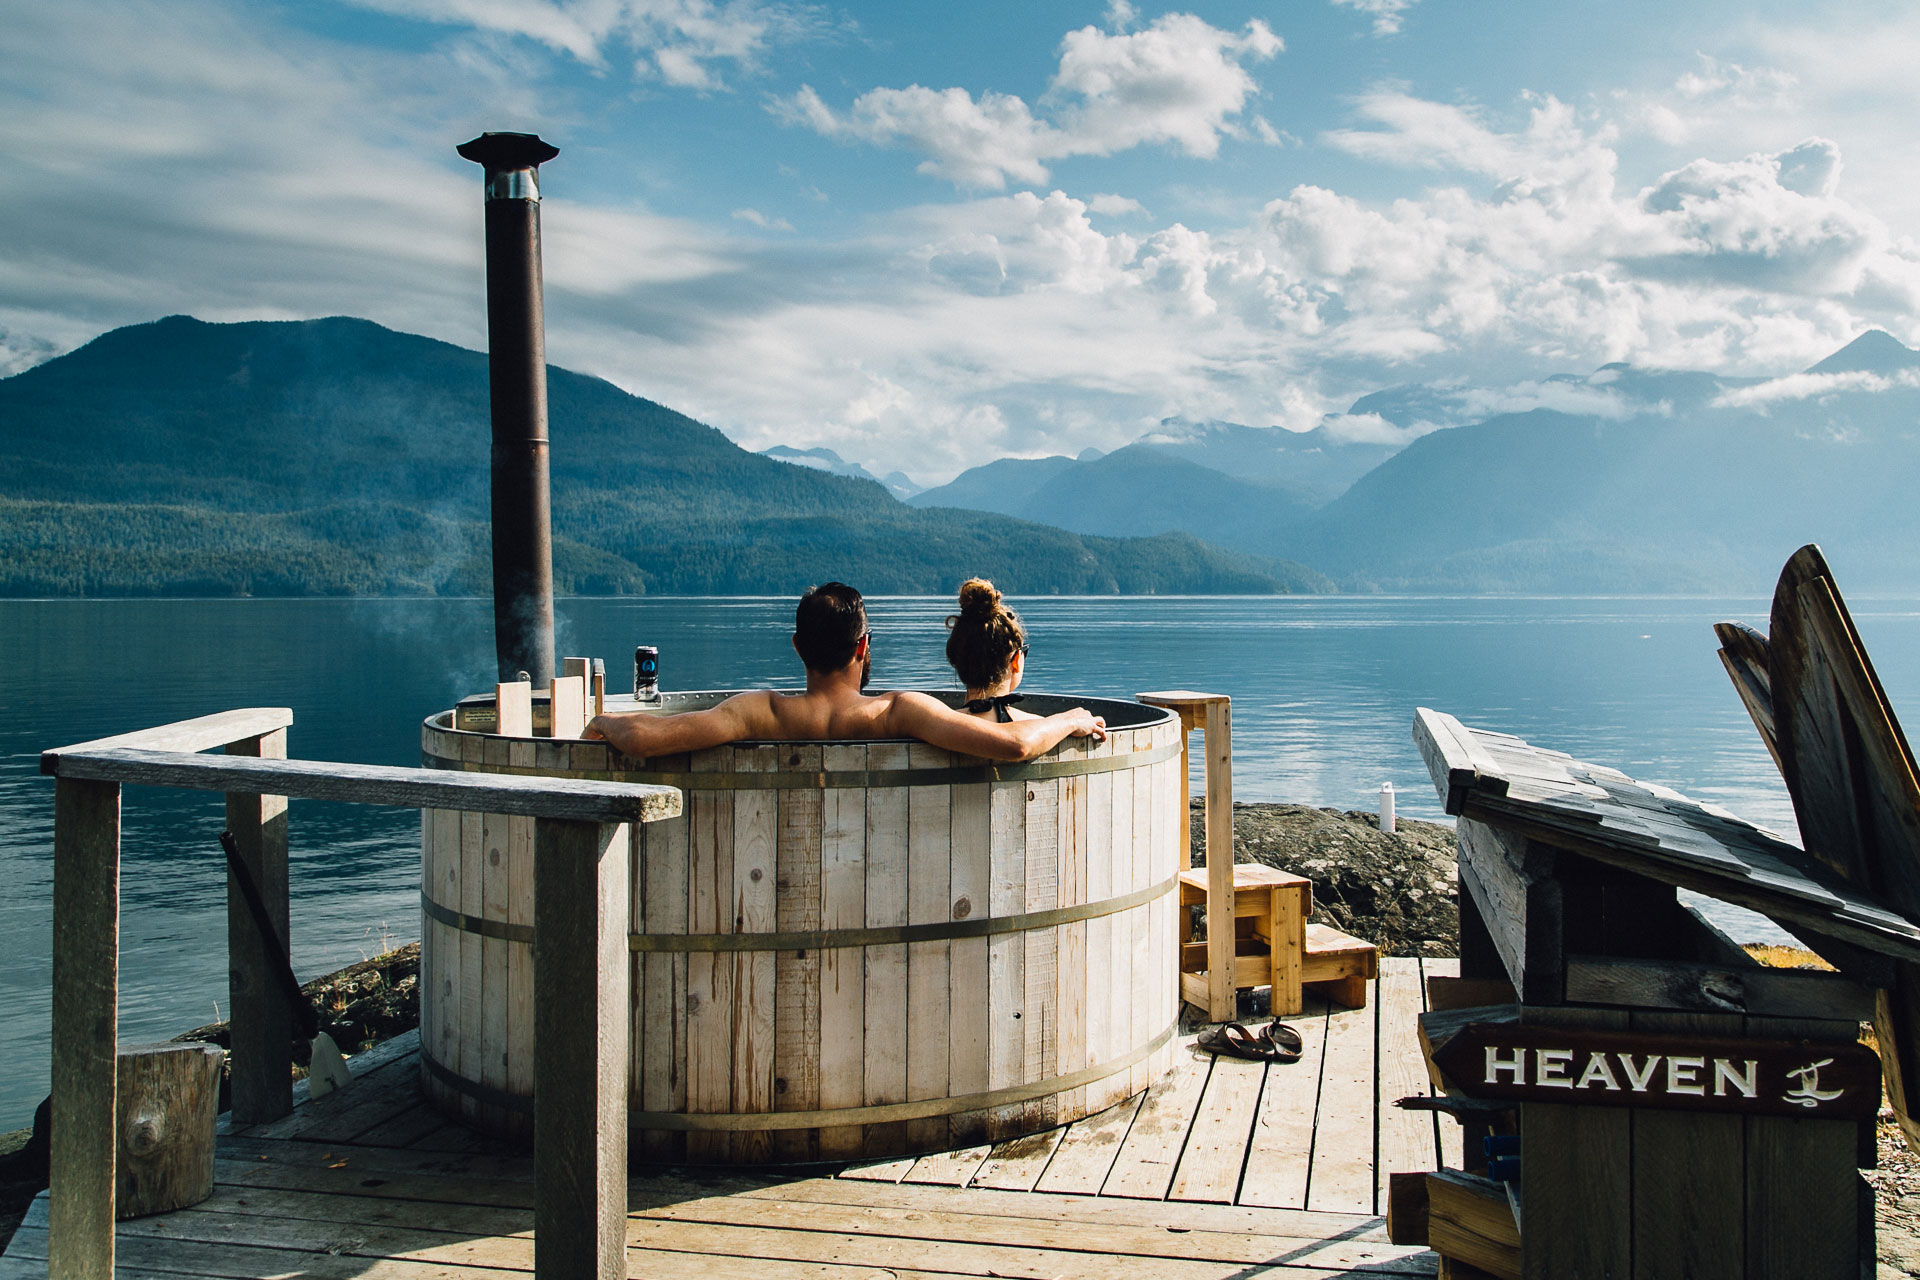 relax in a hot tub overlooking the ocean, restore and recharge with regenerative travel